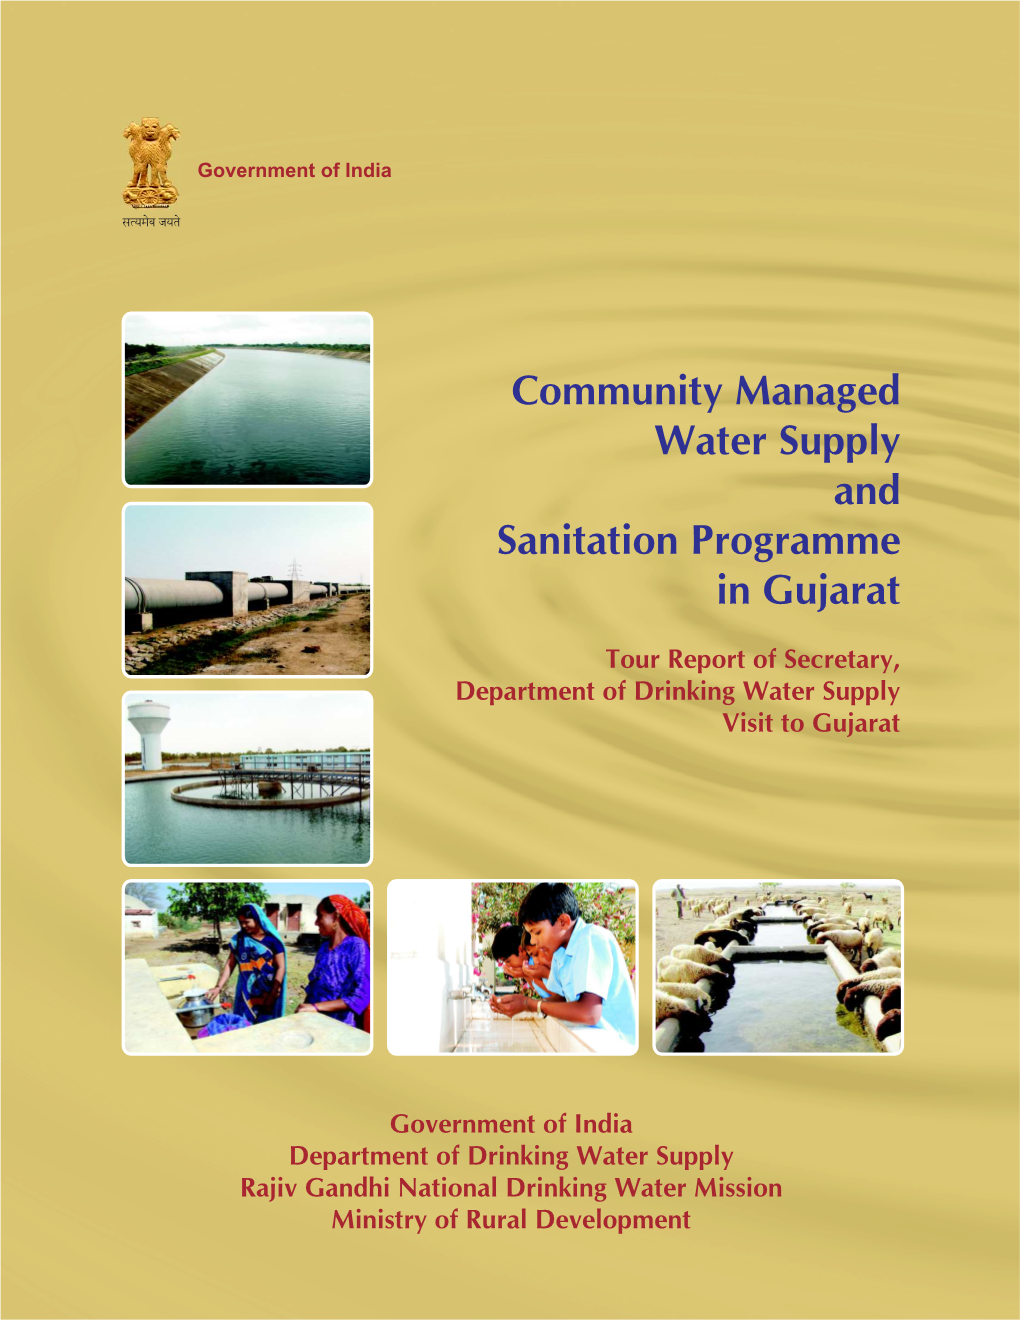 Community Managed Water Supply and Sanitation Programme in Gujarat